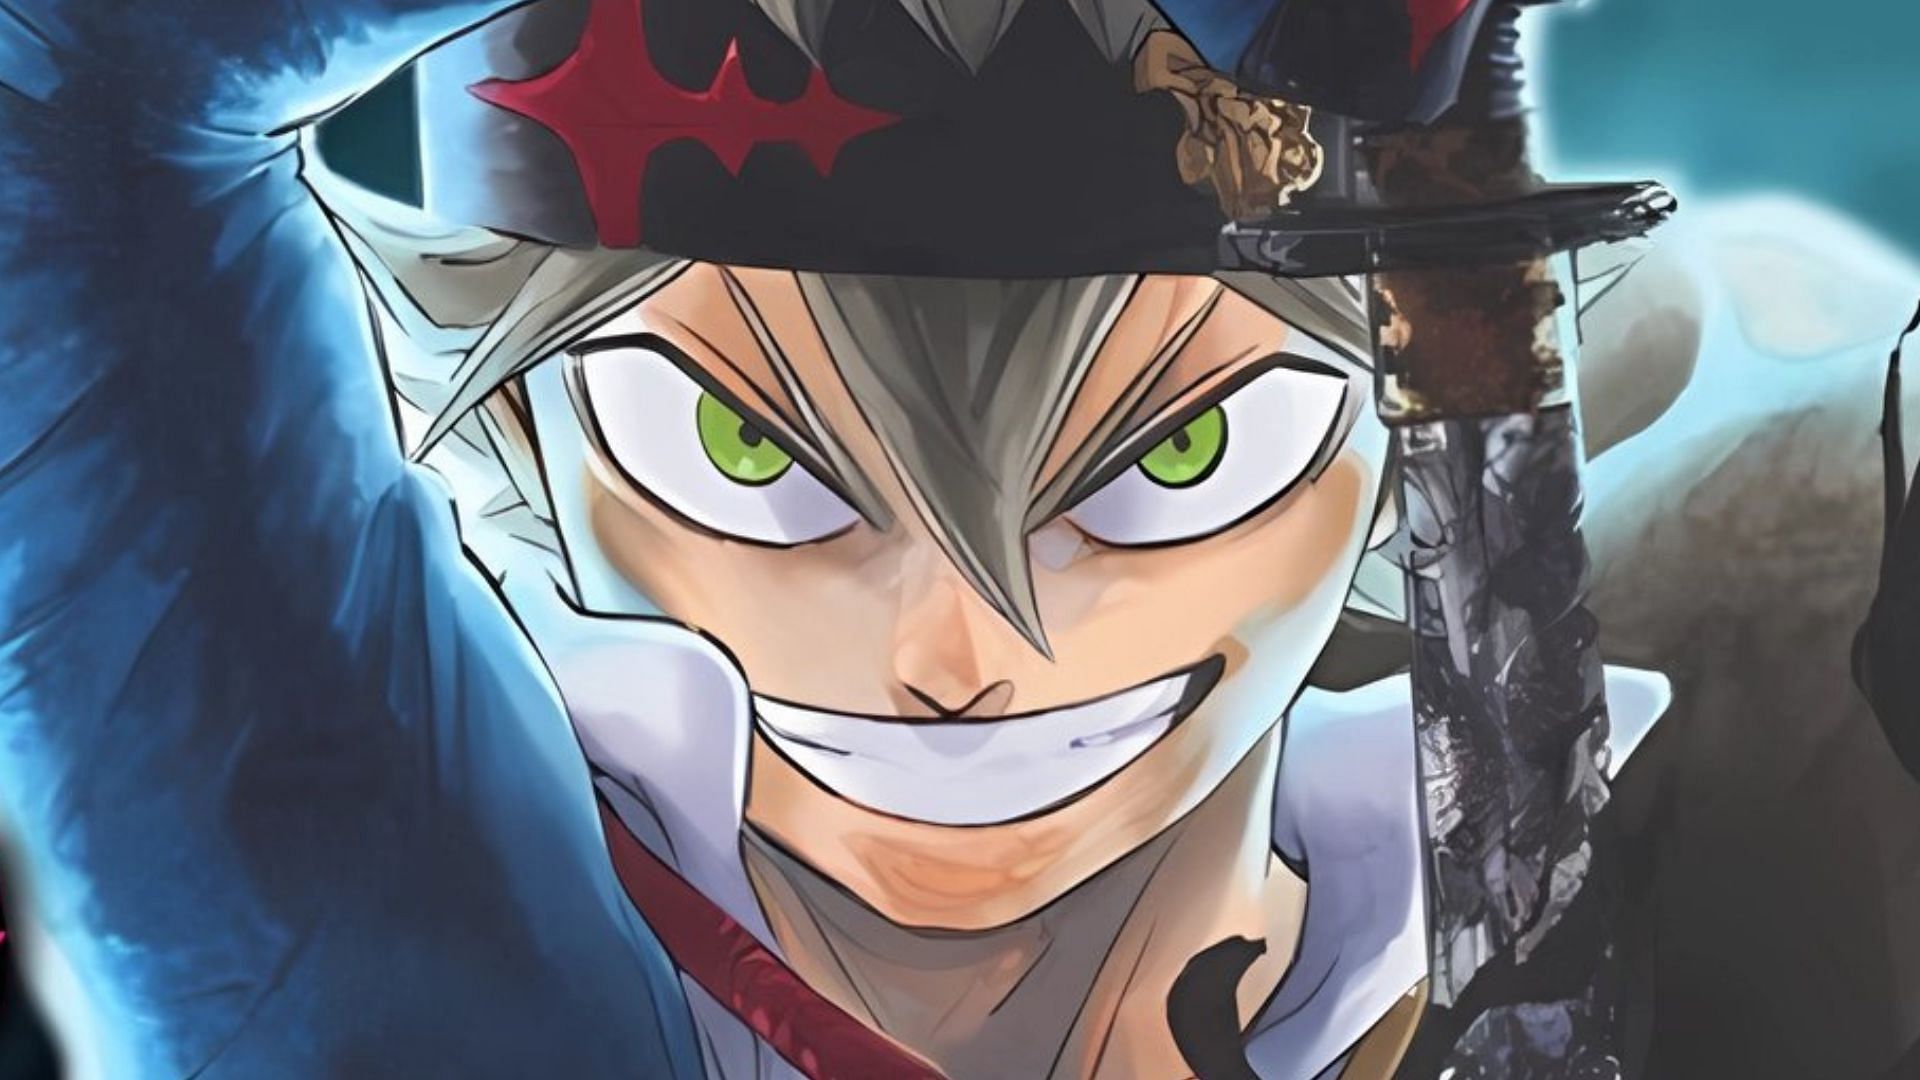 Black Clover chapter 370: Expected release date and time, where to read, and more